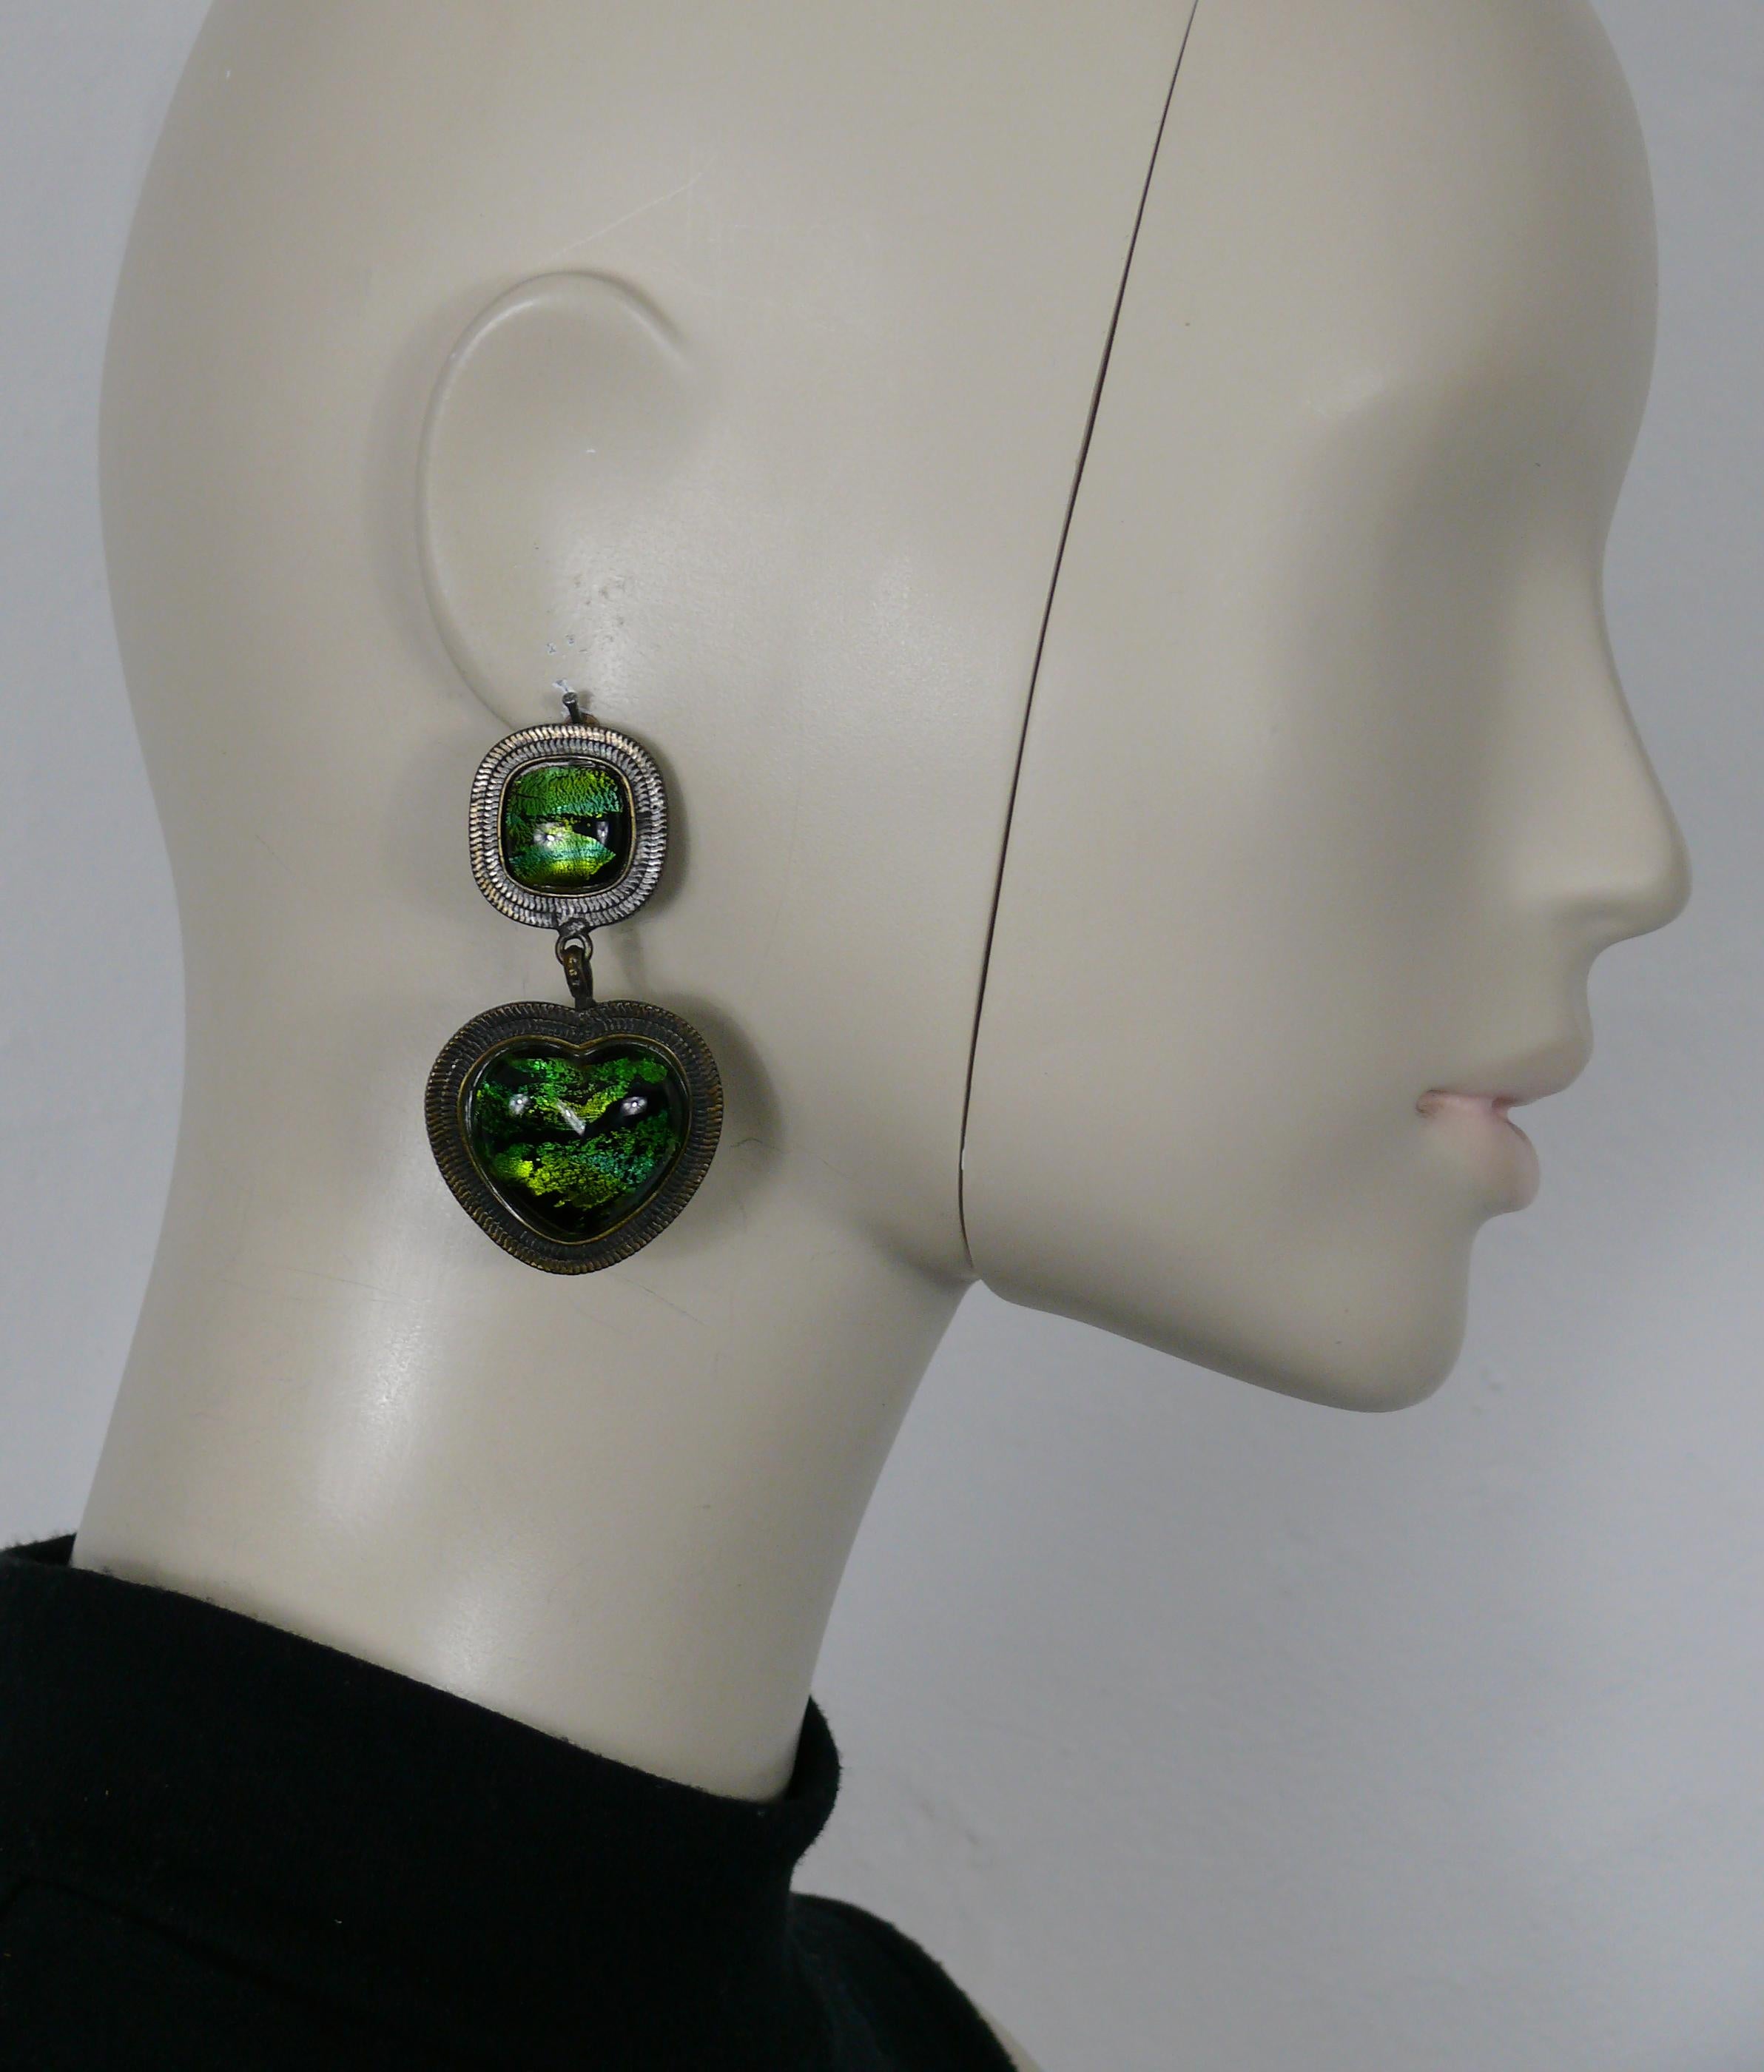 YVES SAINT LAURENT Rive Gauche vintage antiqued bronze tone dangling earrings (clip-on) featuring a heart embellished with black glass cabochons with foil inclusions.

Embossed YVES SAINT LAURENT Rive Gauche Made in France.

Indicative measurements